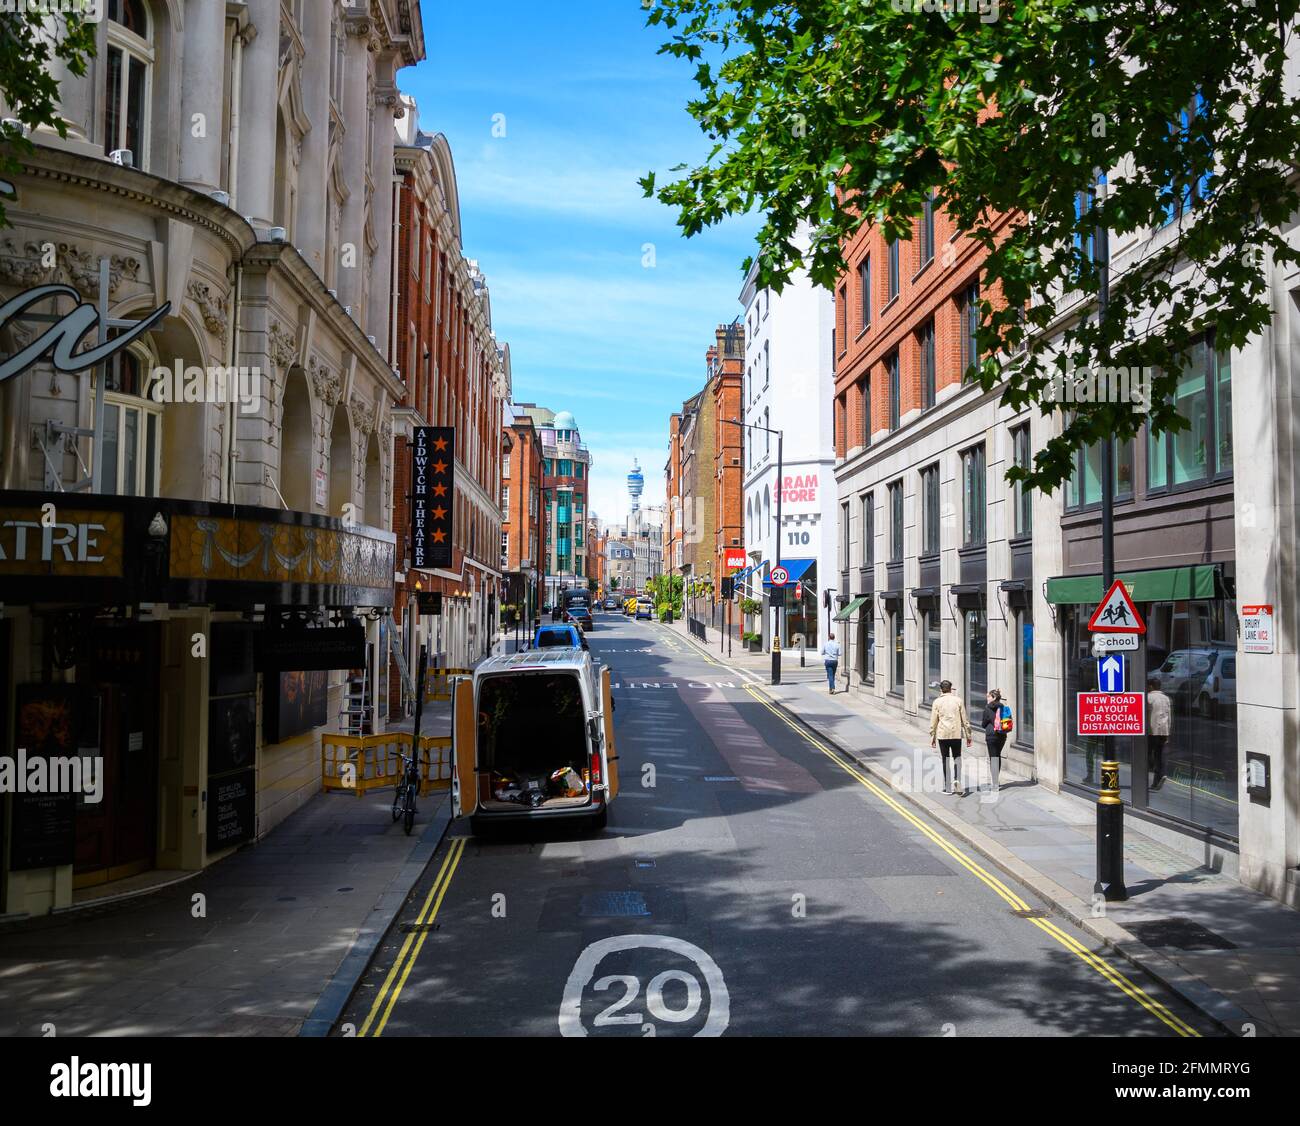 London, United Kingdom - July 30 2020:  The view along Drury Lane from Aldwych Circus Stock Photo